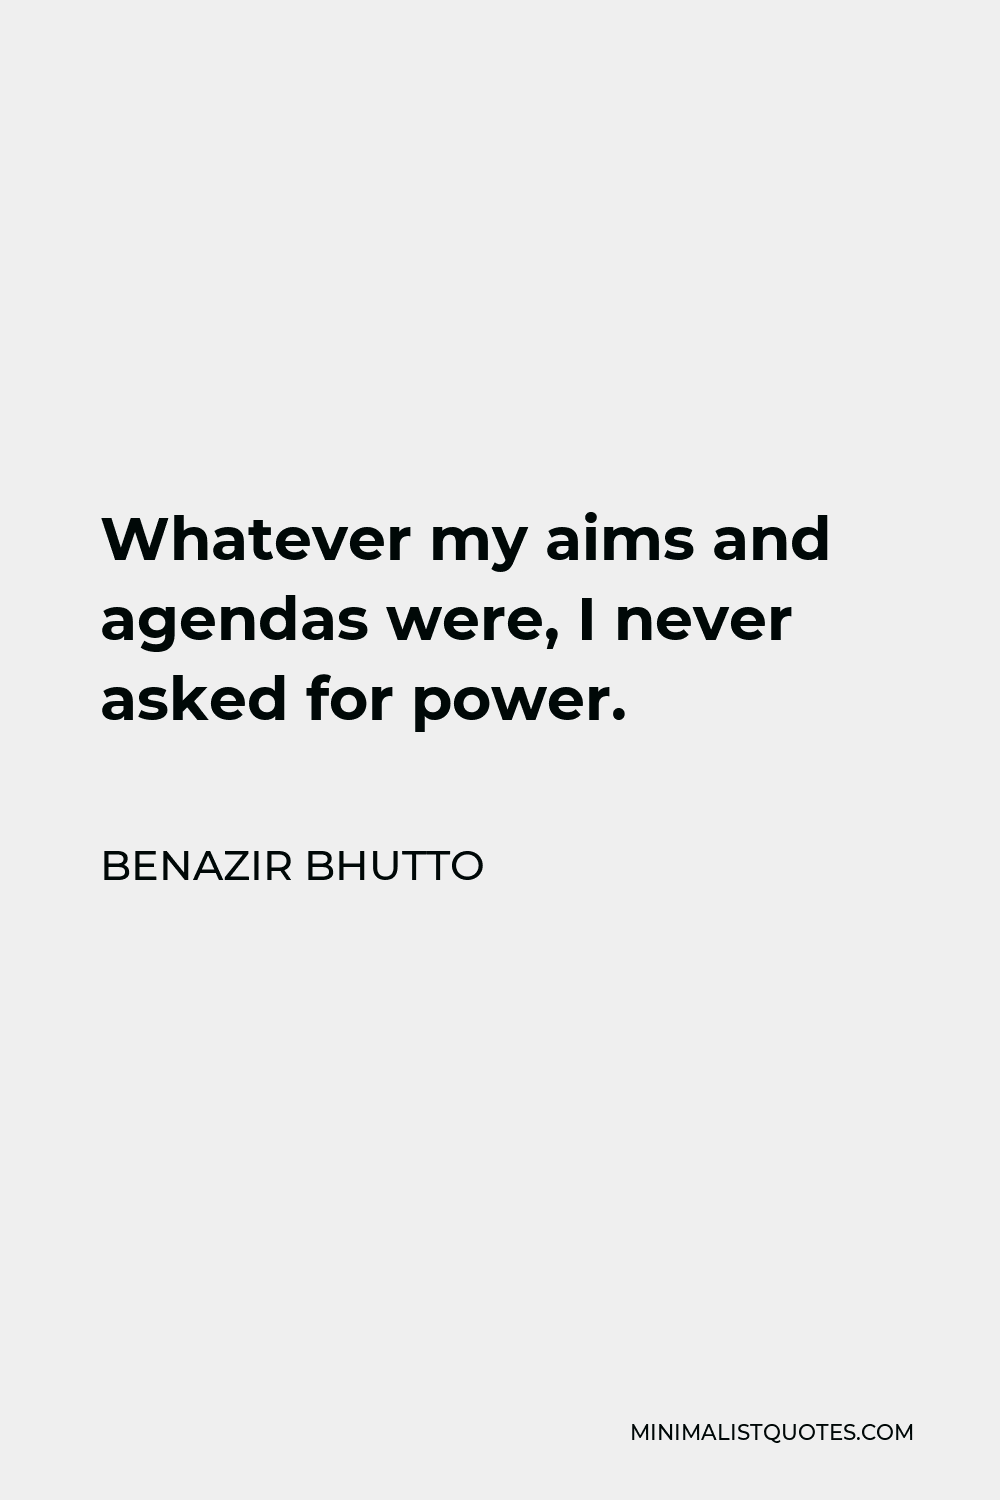 Benazir Bhutto Quote - Whatever my aims and agendas were, I never asked for power.